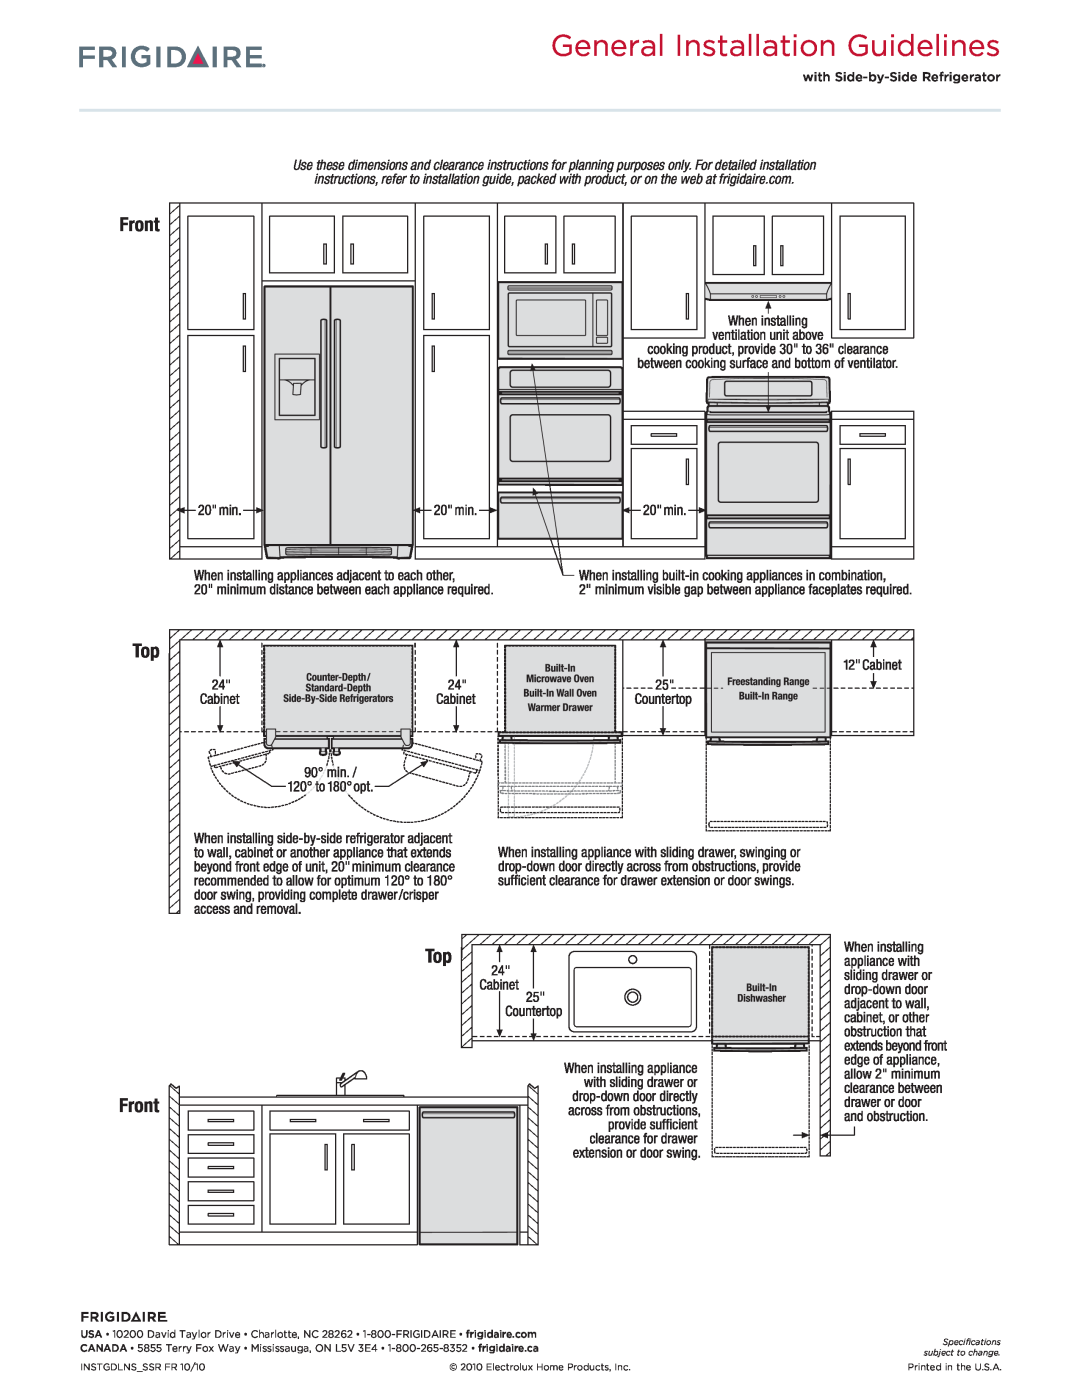 Frigidaire FGHC2345L F dimensions General Installation Guidelines, Top Front 